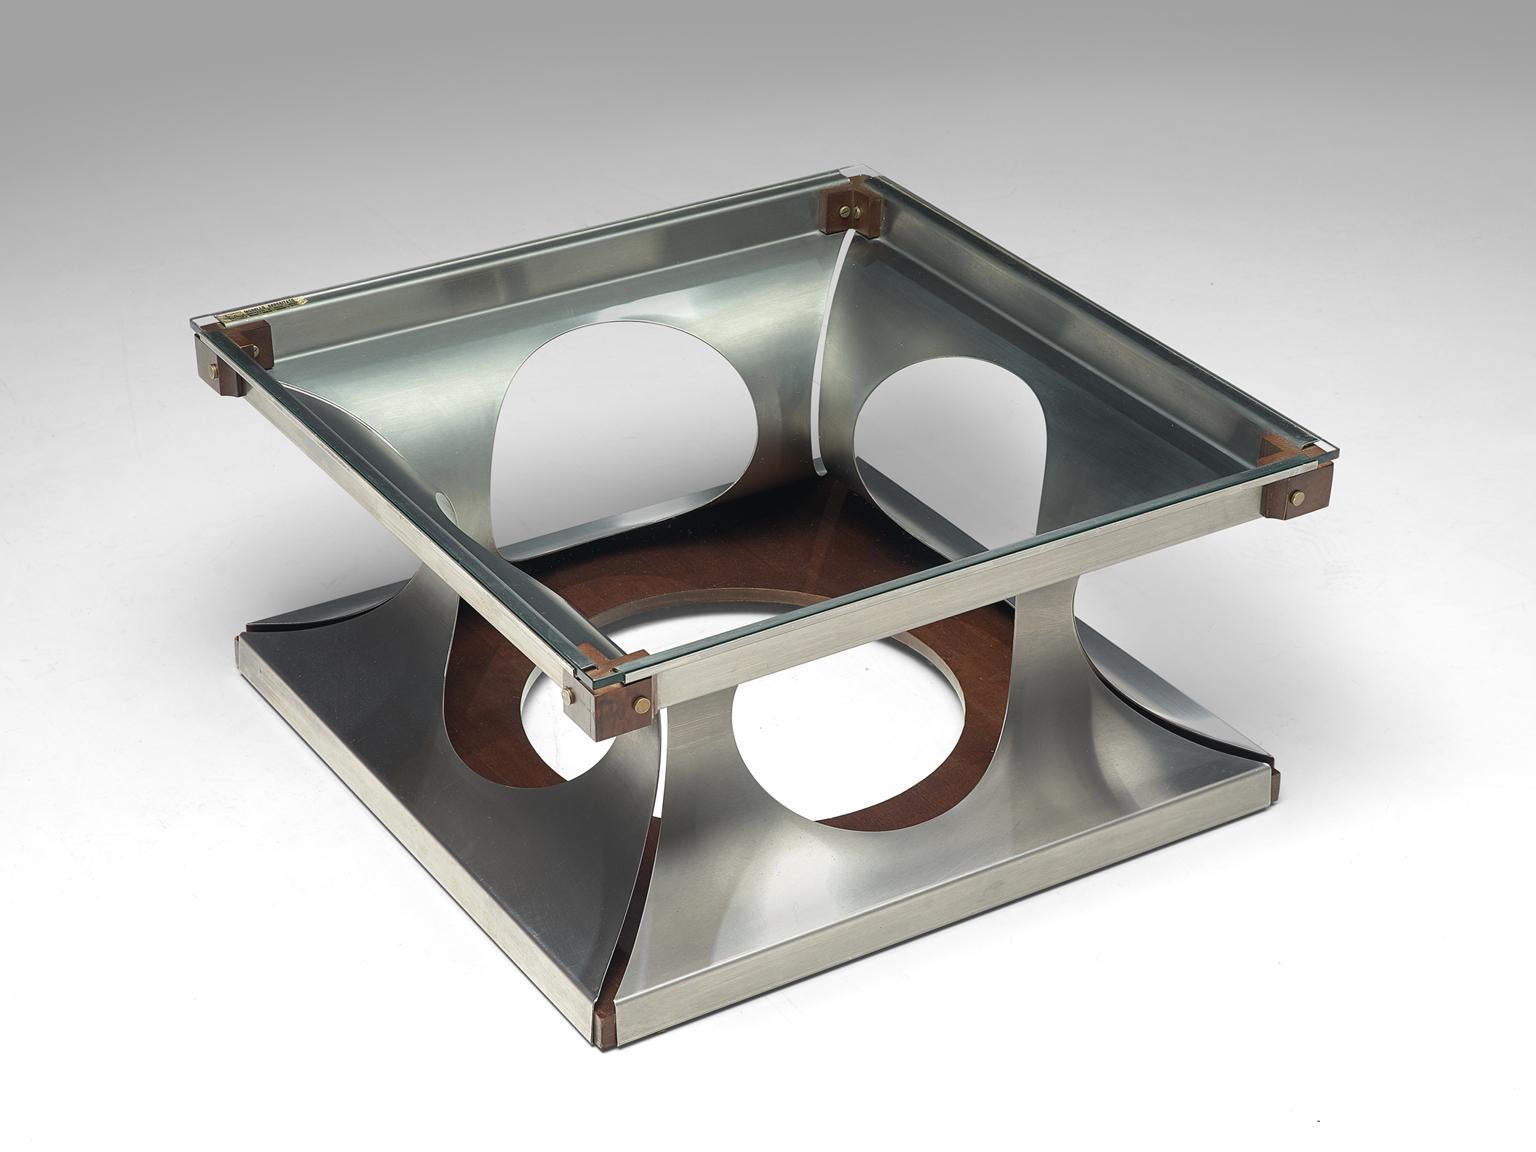 Coffee table, metal, wood and glass, Italy, 1970s

Cocktail table made of wood, steel and glass. It consists of four parts of folded steel plates with round cutouts, with a square shaped clear glass top. The corners are finished with wooden and